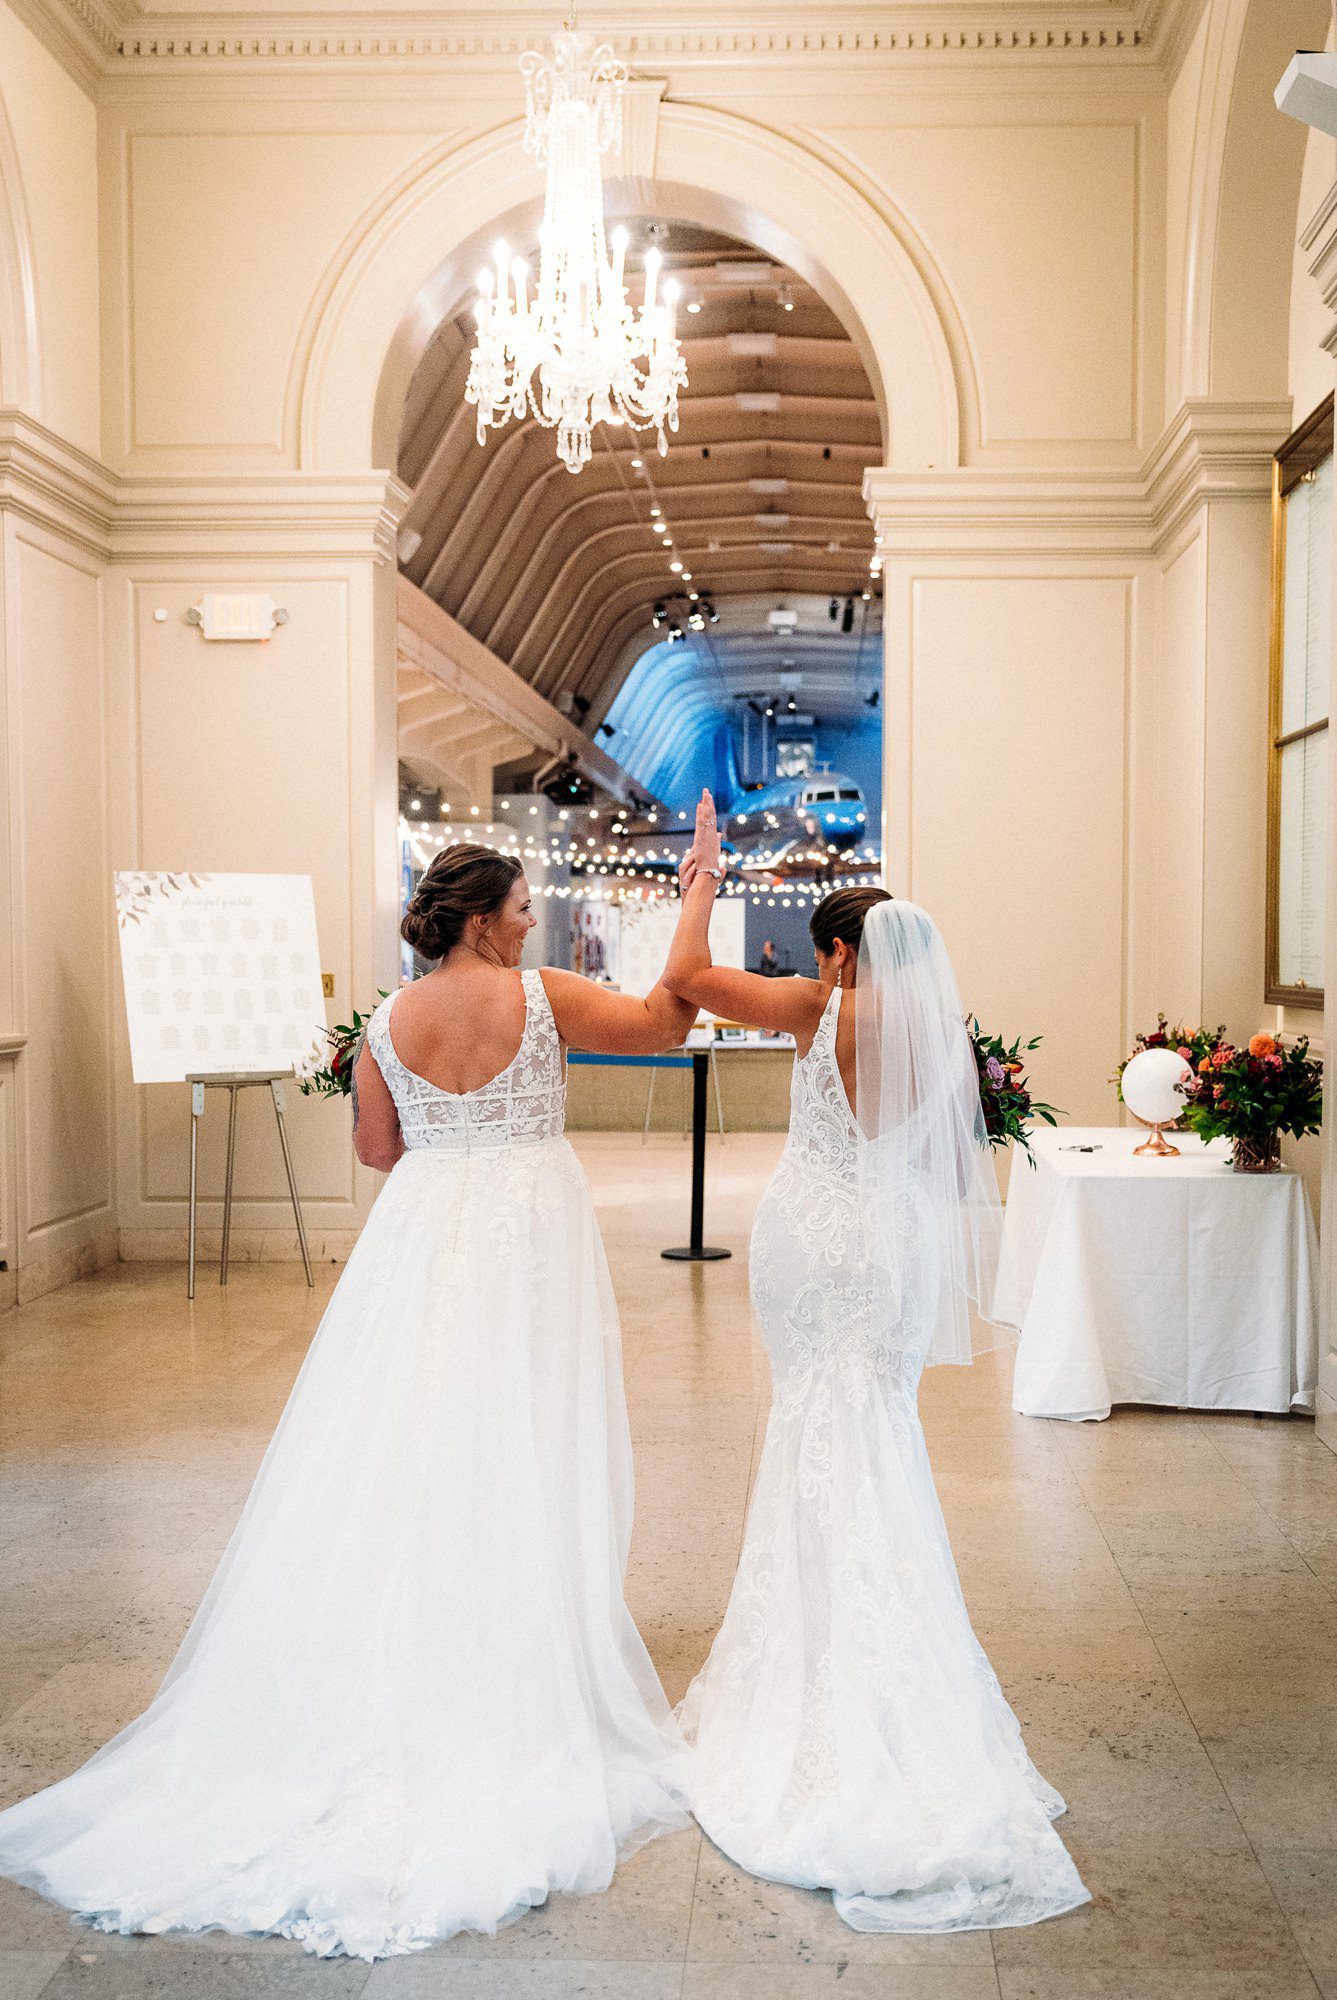 The henry ford museum wedding